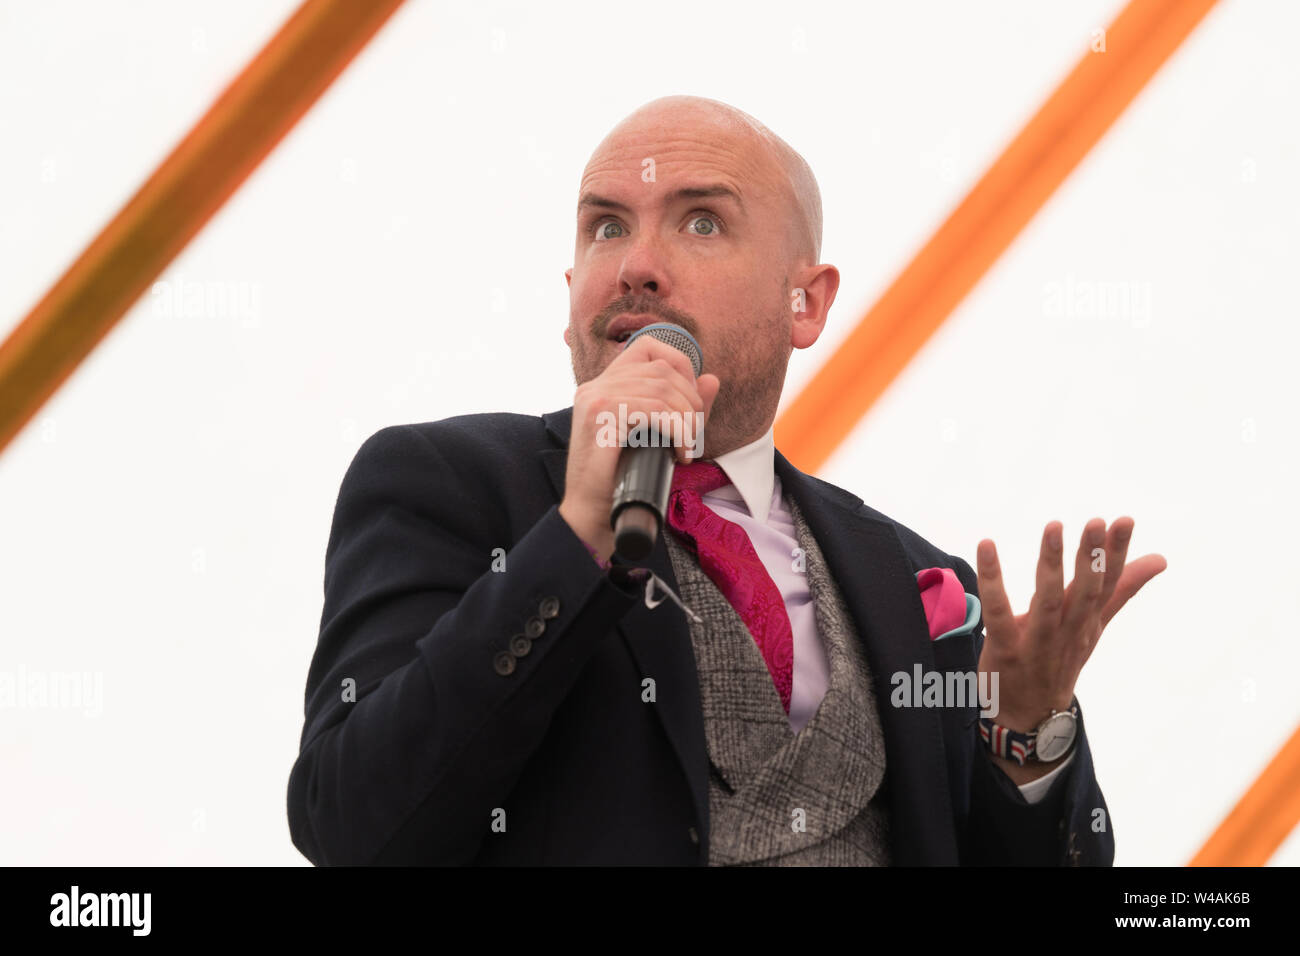 Suffolk, UK. Sunday, 21 July, 2019. Tom Allen performing live on the comedy stage on Day 3 of the 2019 Latitude Festival. Photo: Roger Garfield/Alamy Live News Stock Photo